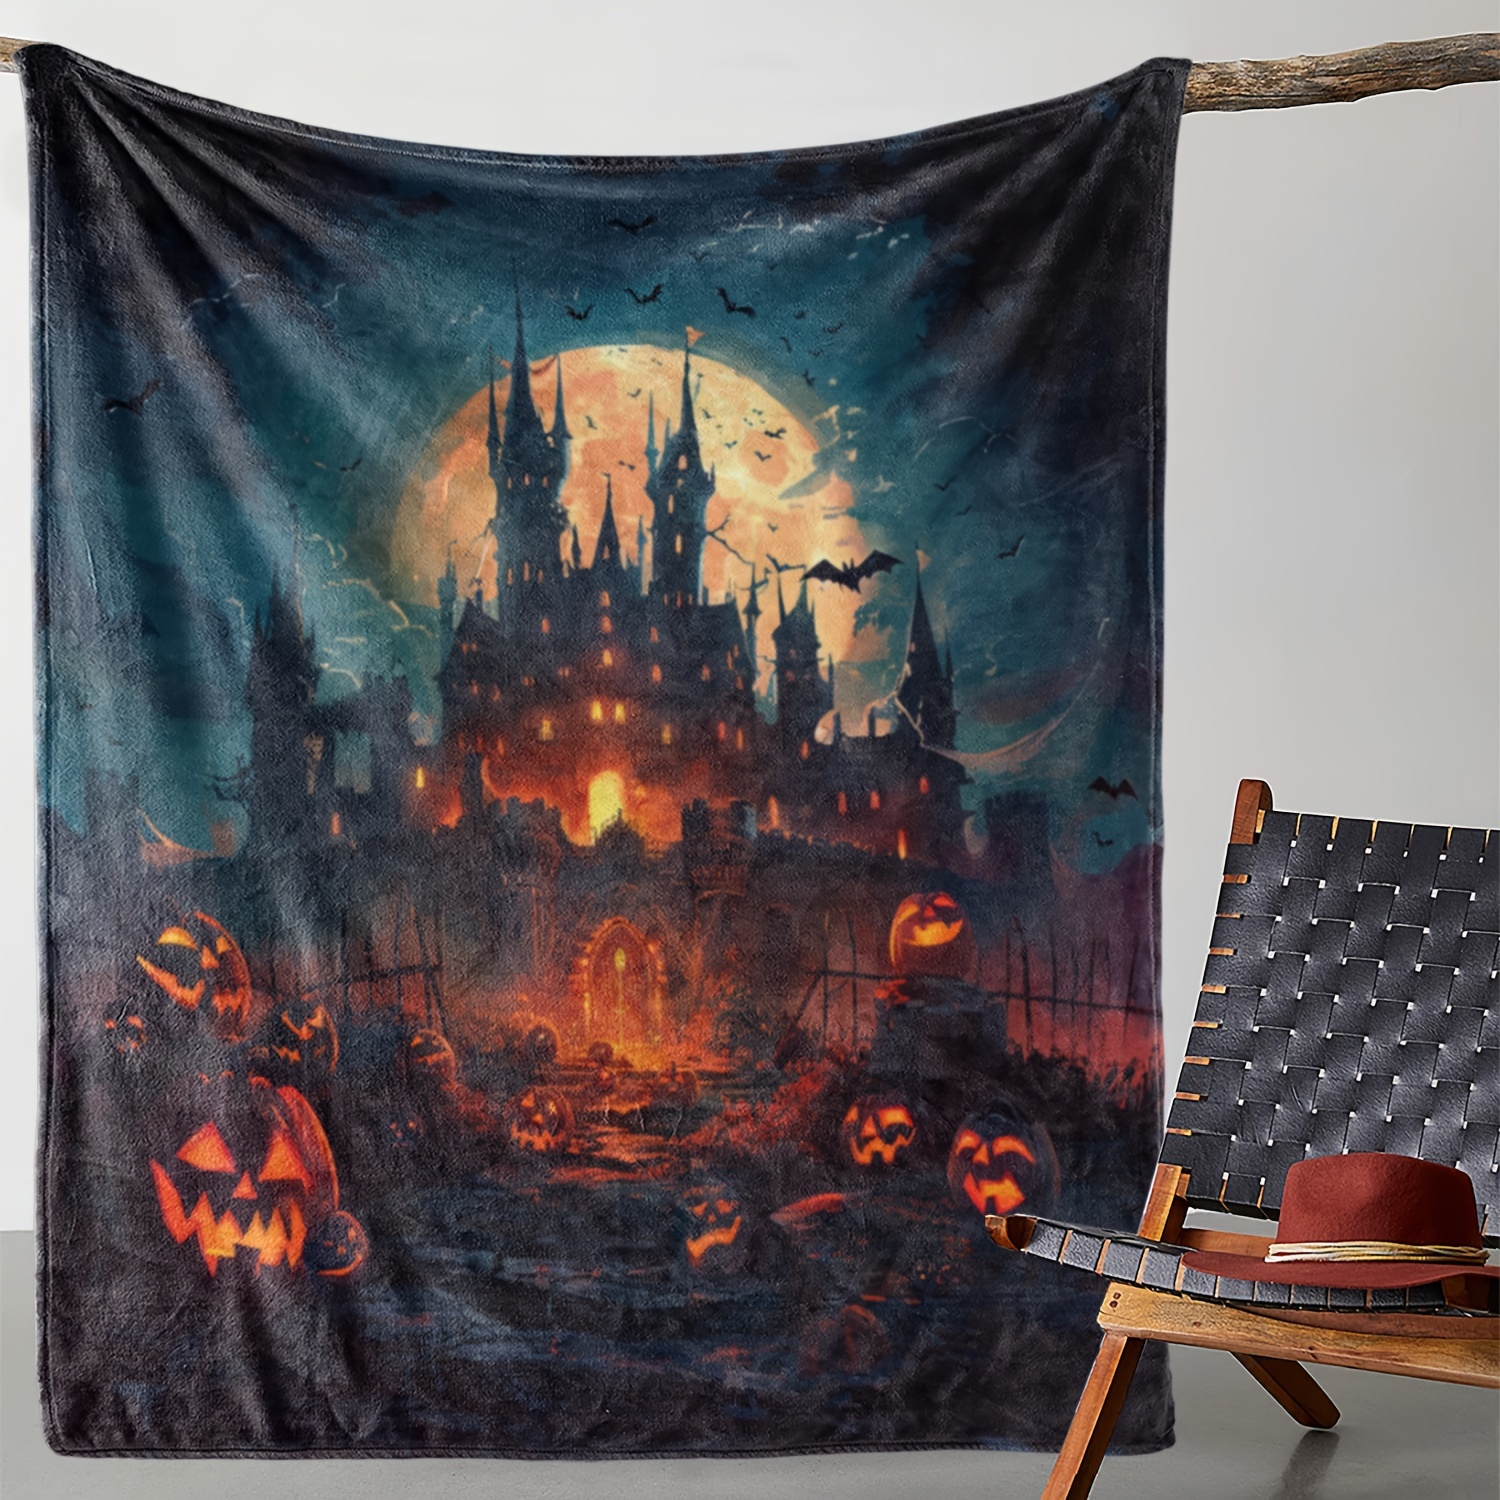 

Halloween Pumpkin Castle Print Flannel Throw Blanket, Vintage Style Cozy Warm Soft Fleece Blanket For Couch Bed Sofa Car Office Camping Travel, All Seasons Lightweight Woven Polyester Blanket